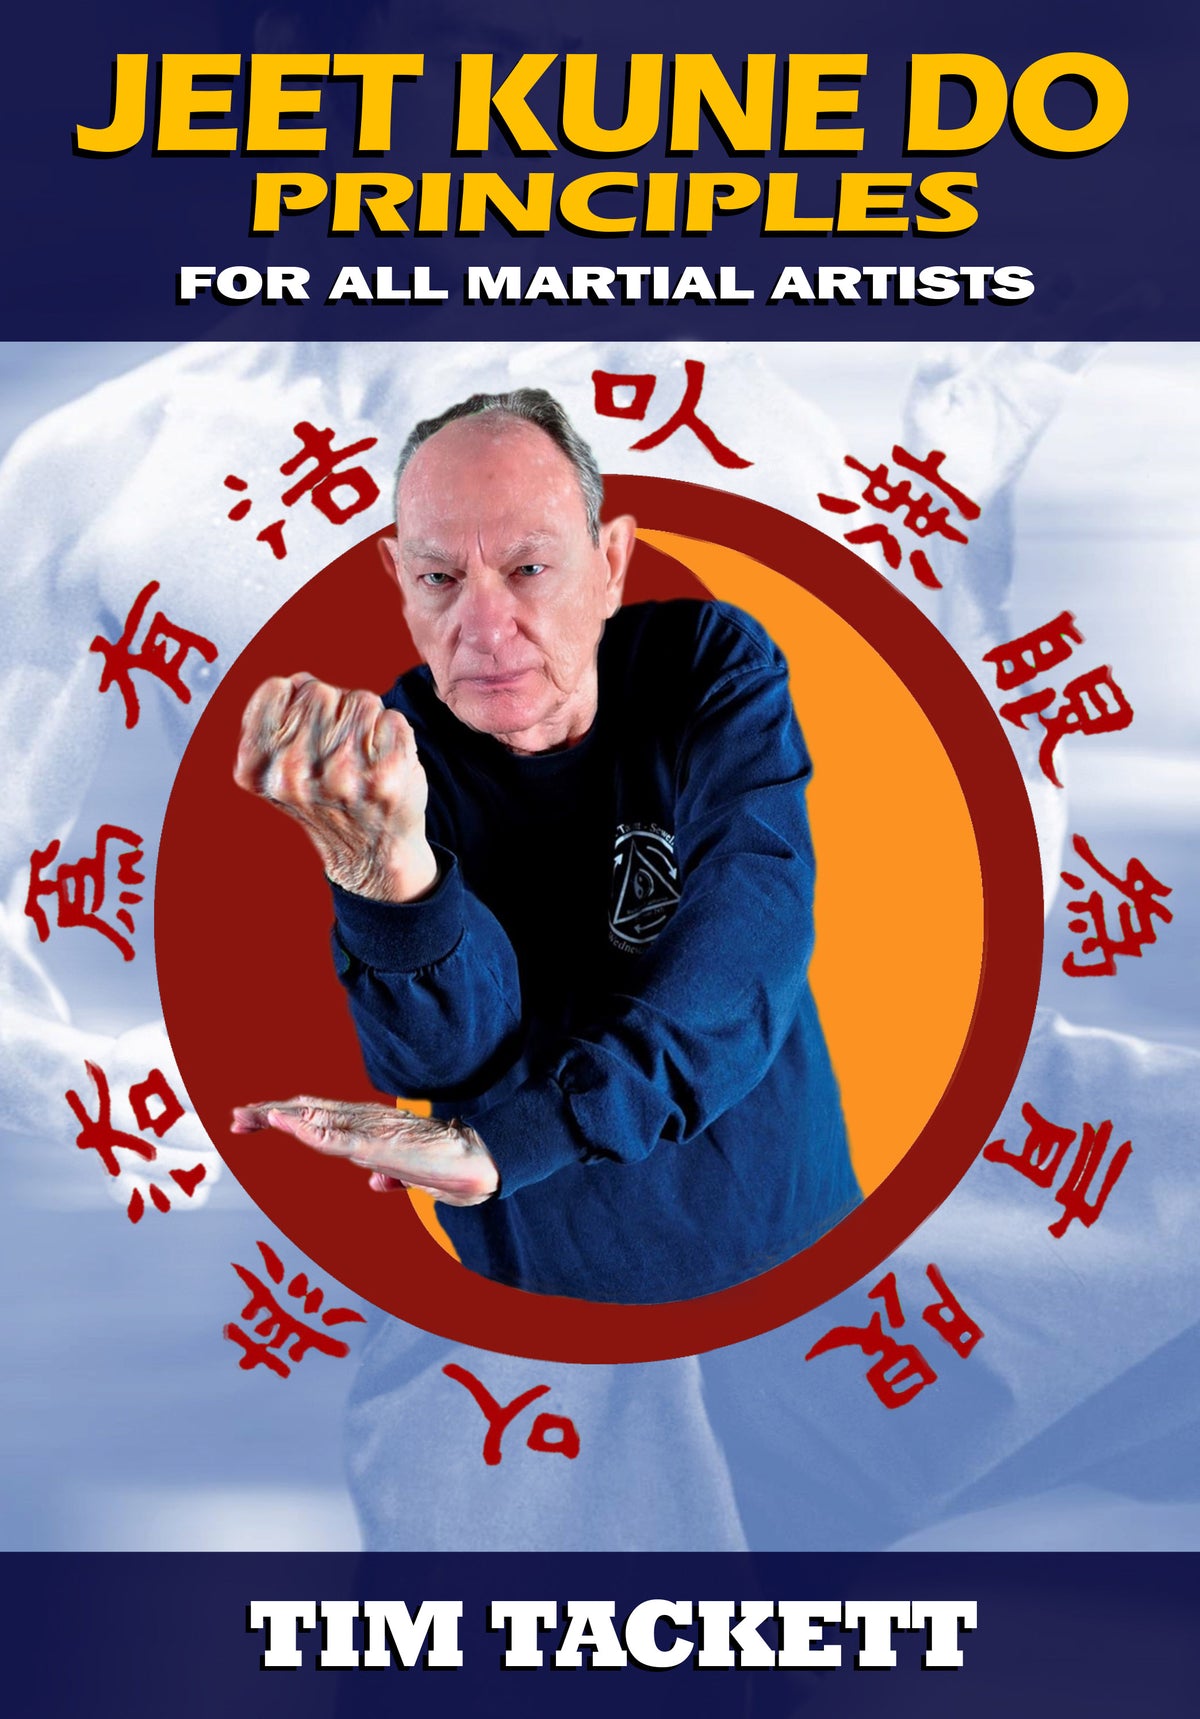 Jeet Kune Do Principles for All Martial Artists book Tim Tackett